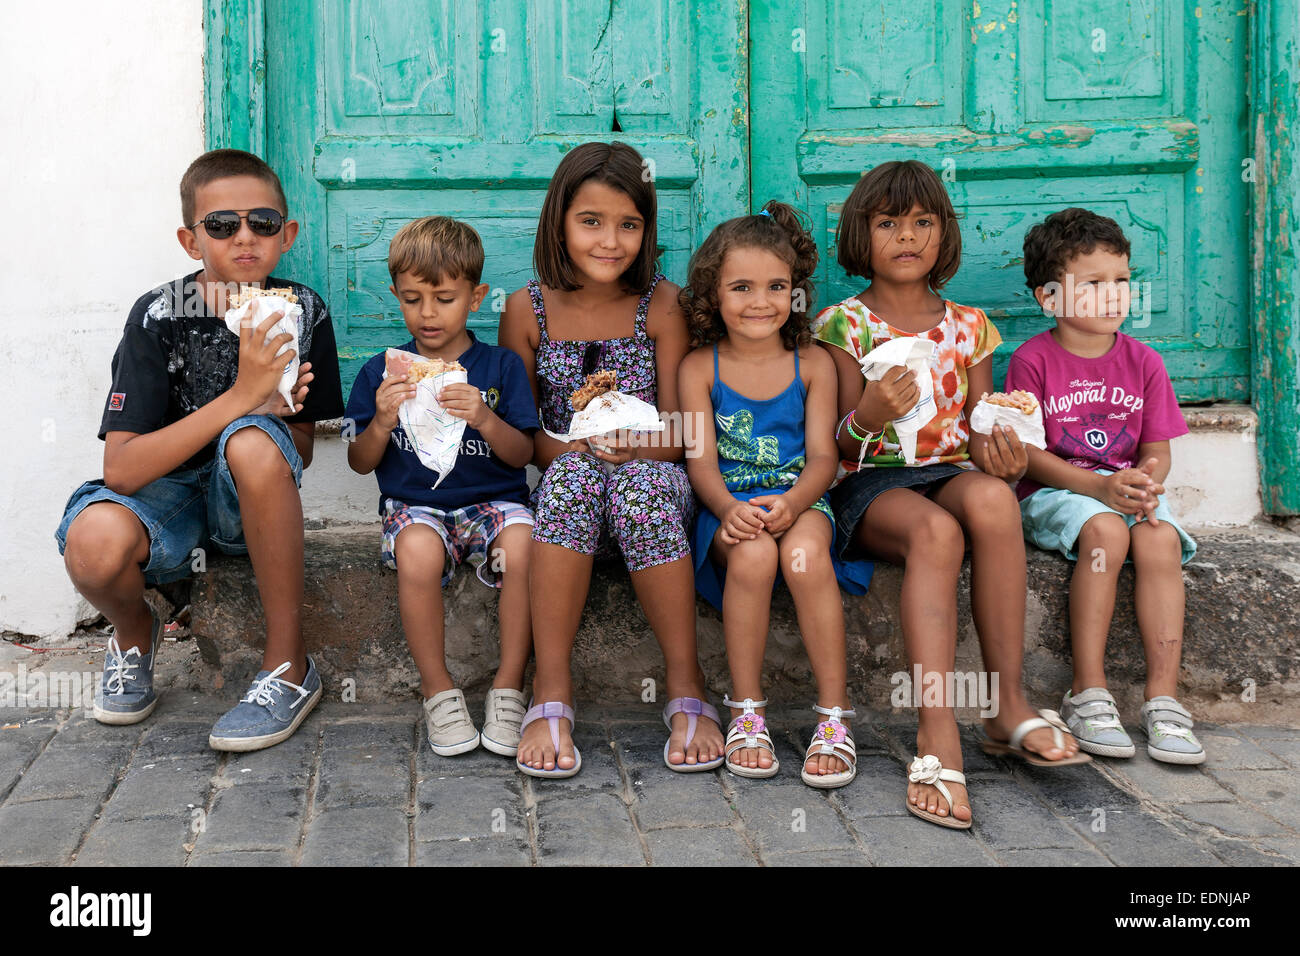 Children sitting in front of a green door holding food, Teguise, Lanzarote, Canary Islands, Spain Stock Photo